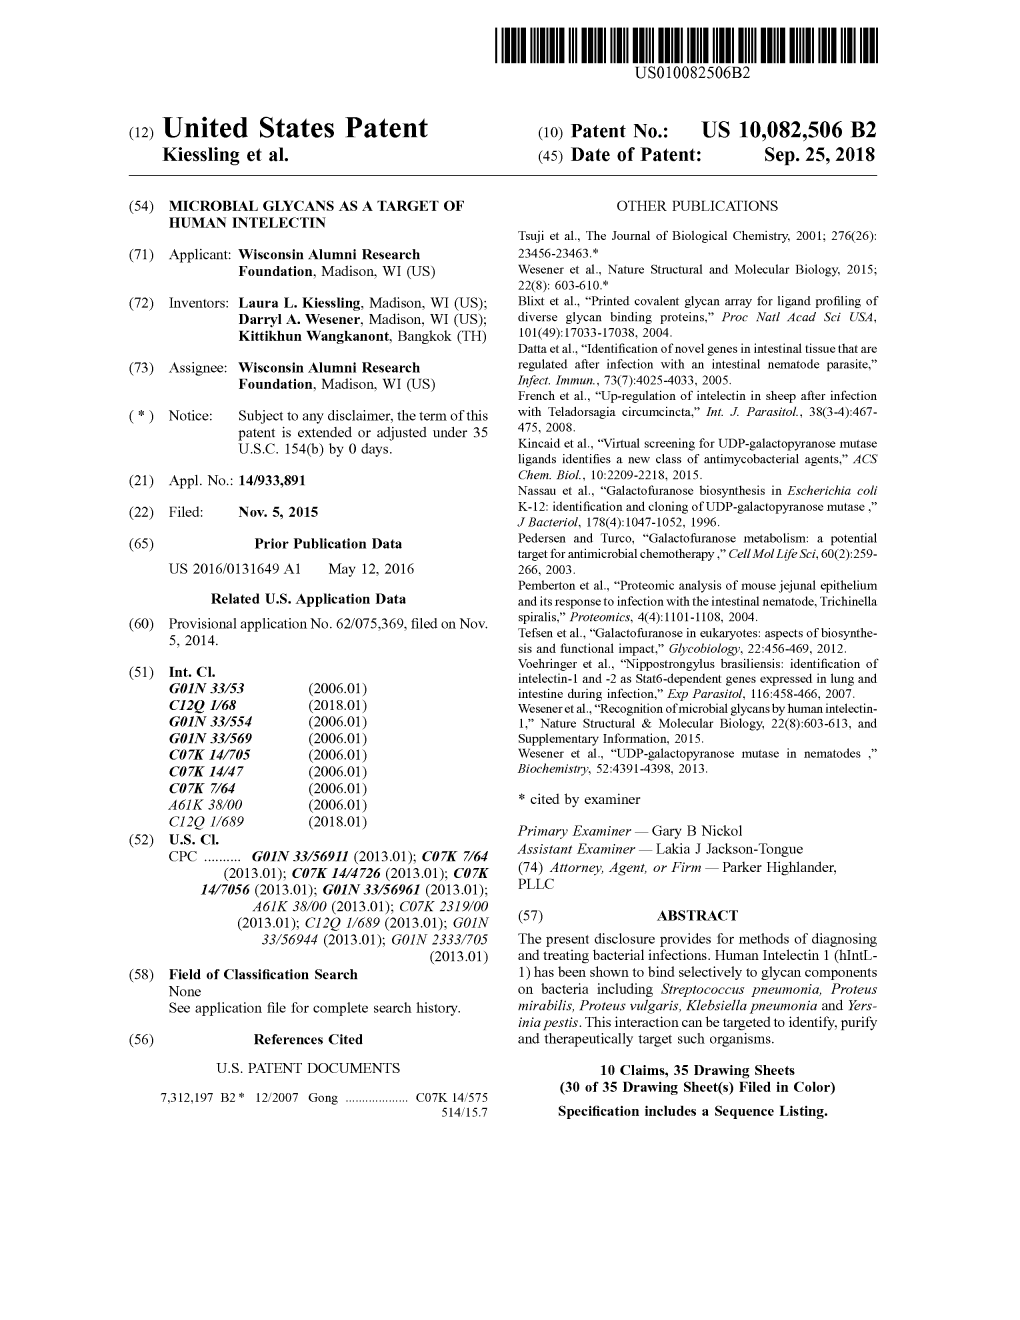 View U.S. Patent No. 10082506 in PDF Format